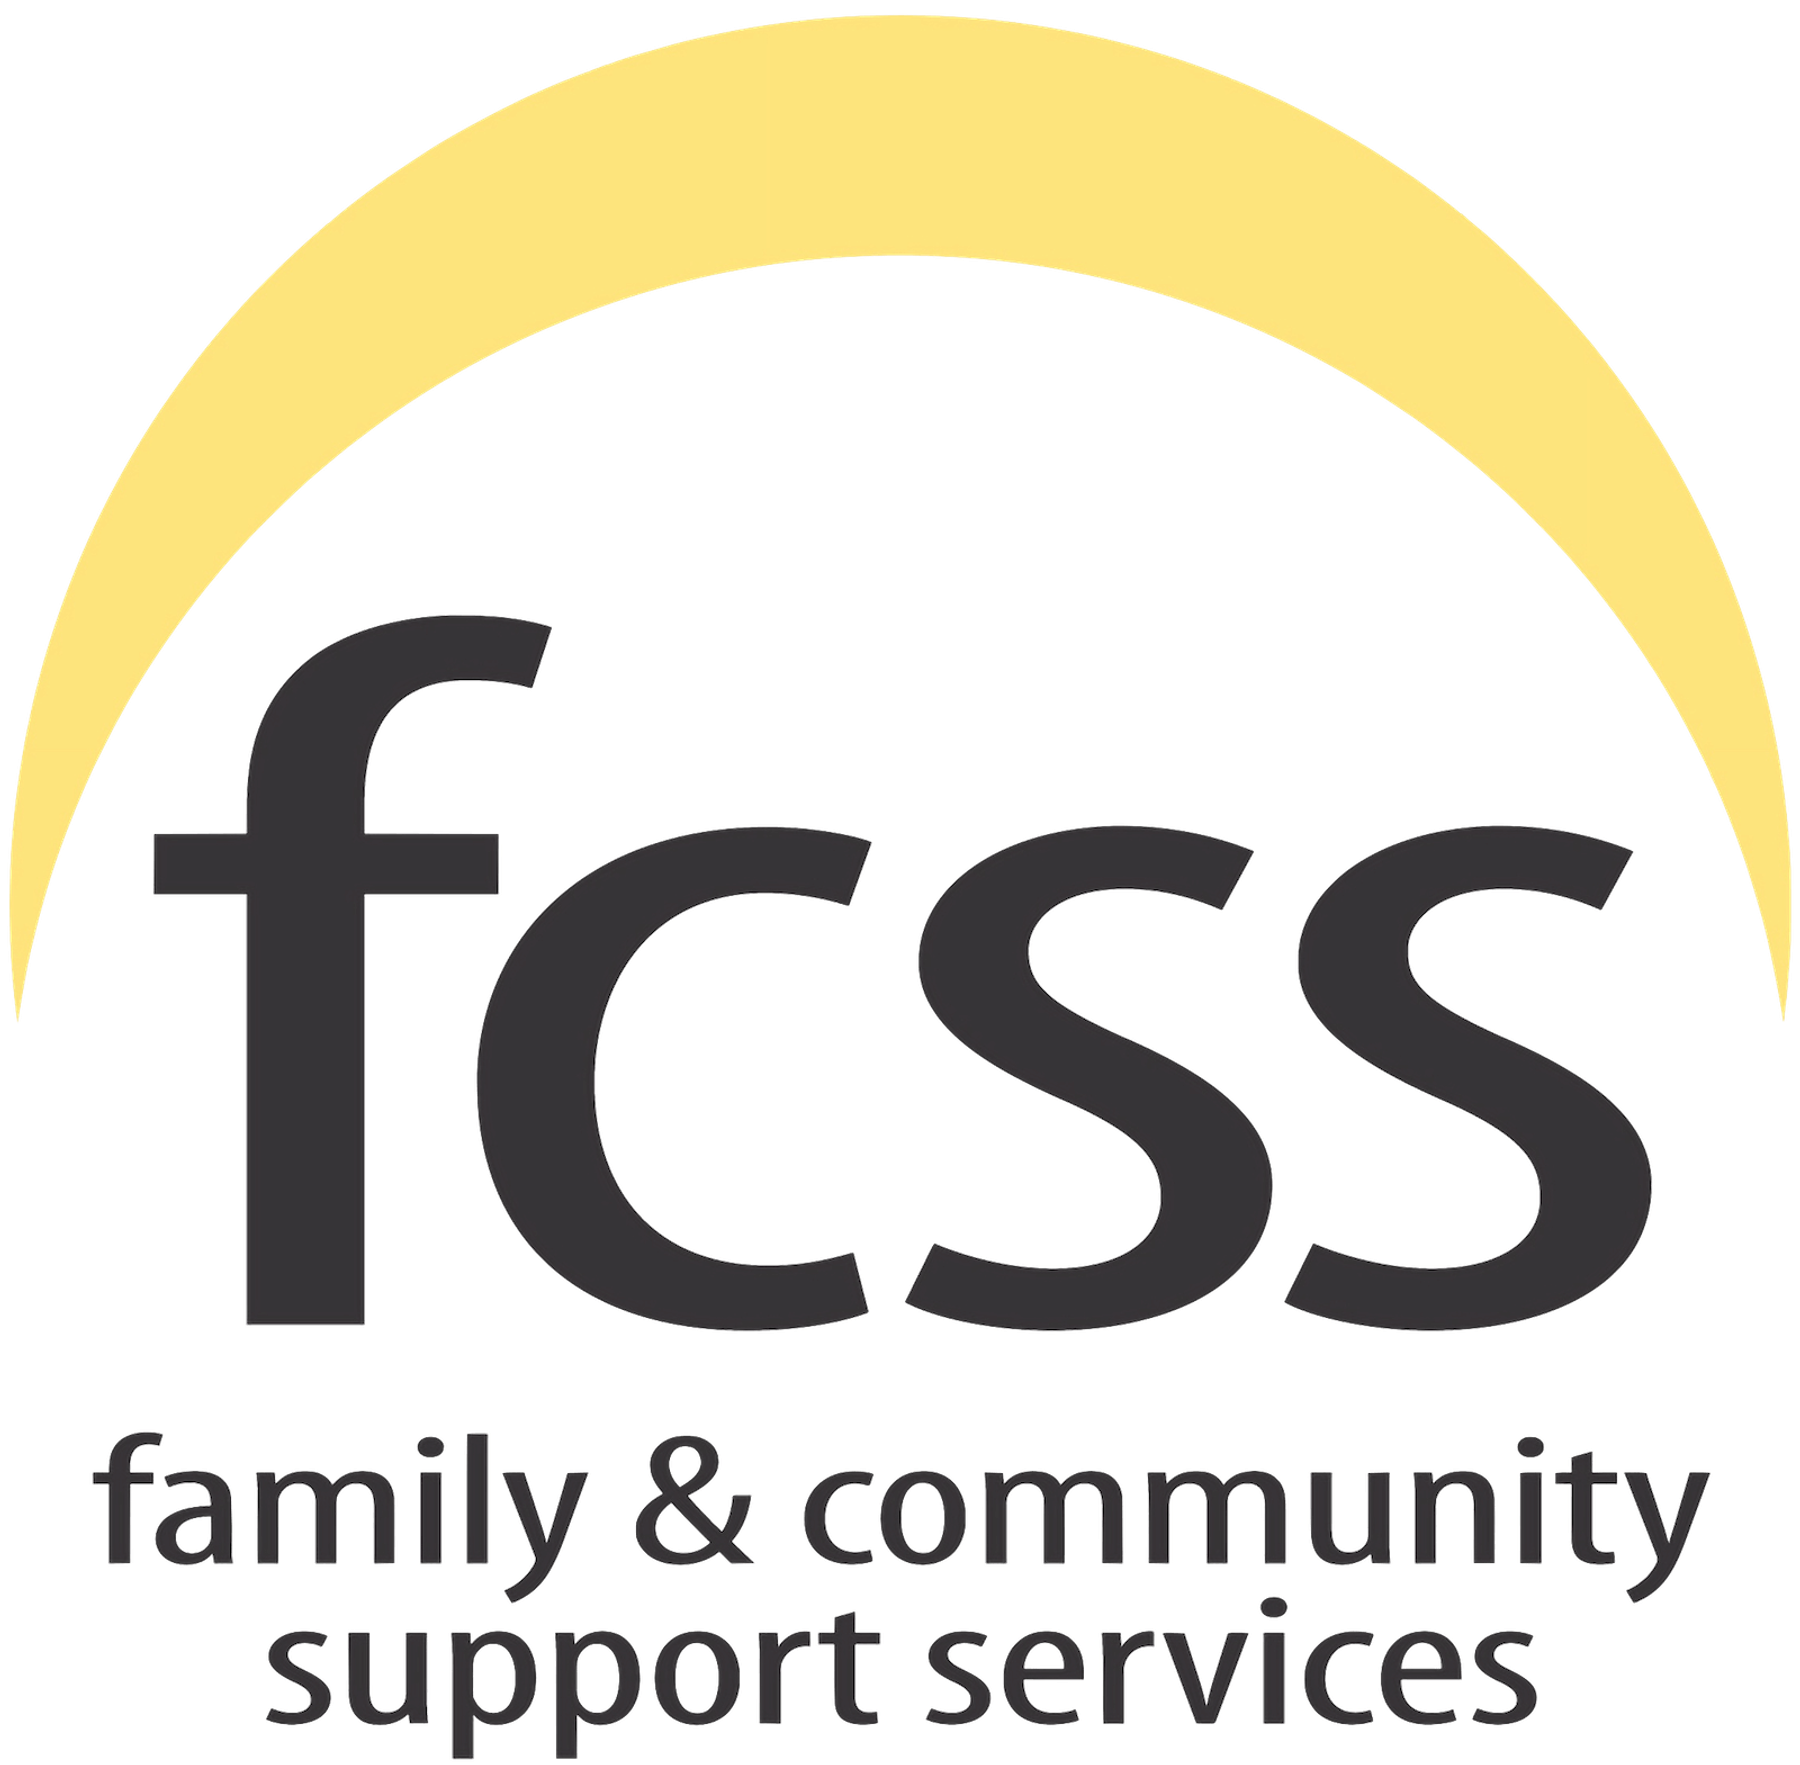 Family & Community Support Services (FCSS) logo on a transparent background